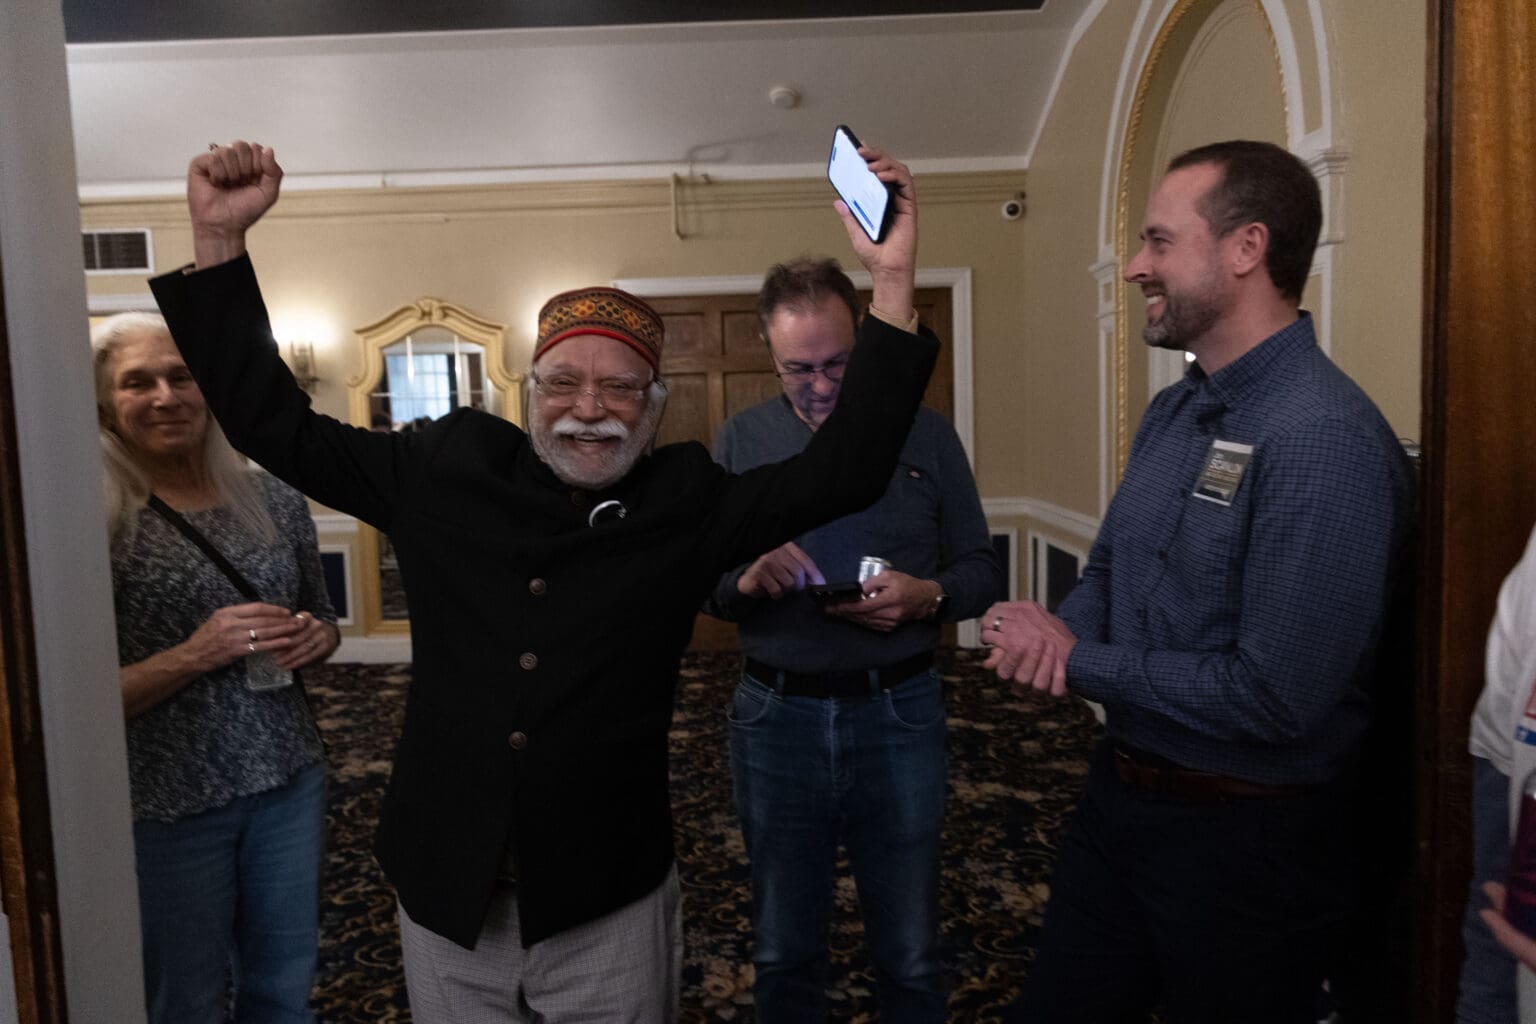 Whatcom County Executive incumbent Satpal Sidhu reacts in celebration with a phone in hand and both arms raised.